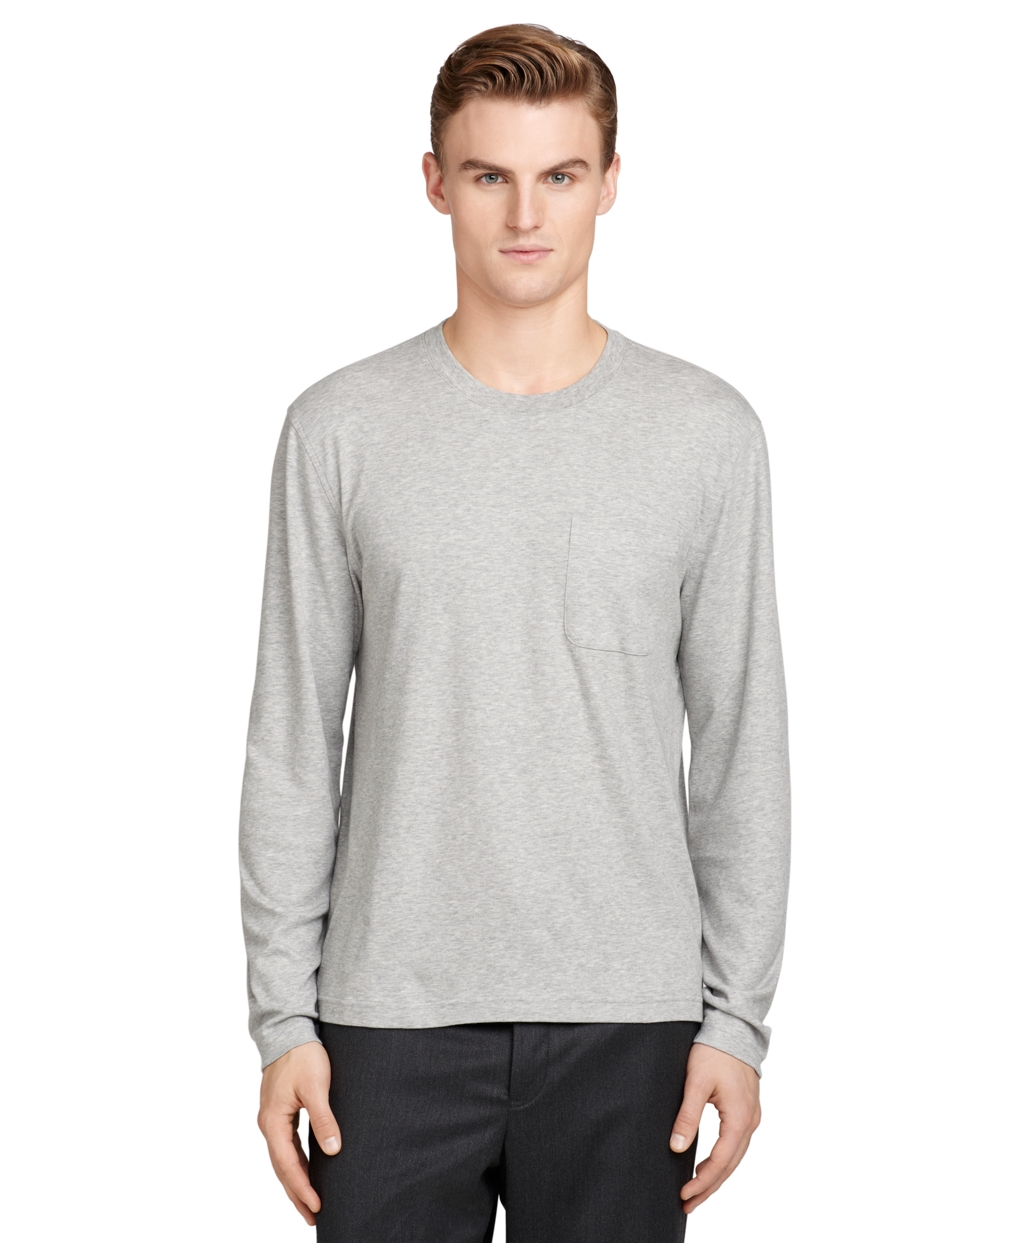 Lyst - Brooks Brothers Grey Long-sleeve Crewneck Tee Shirt in Gray for Men